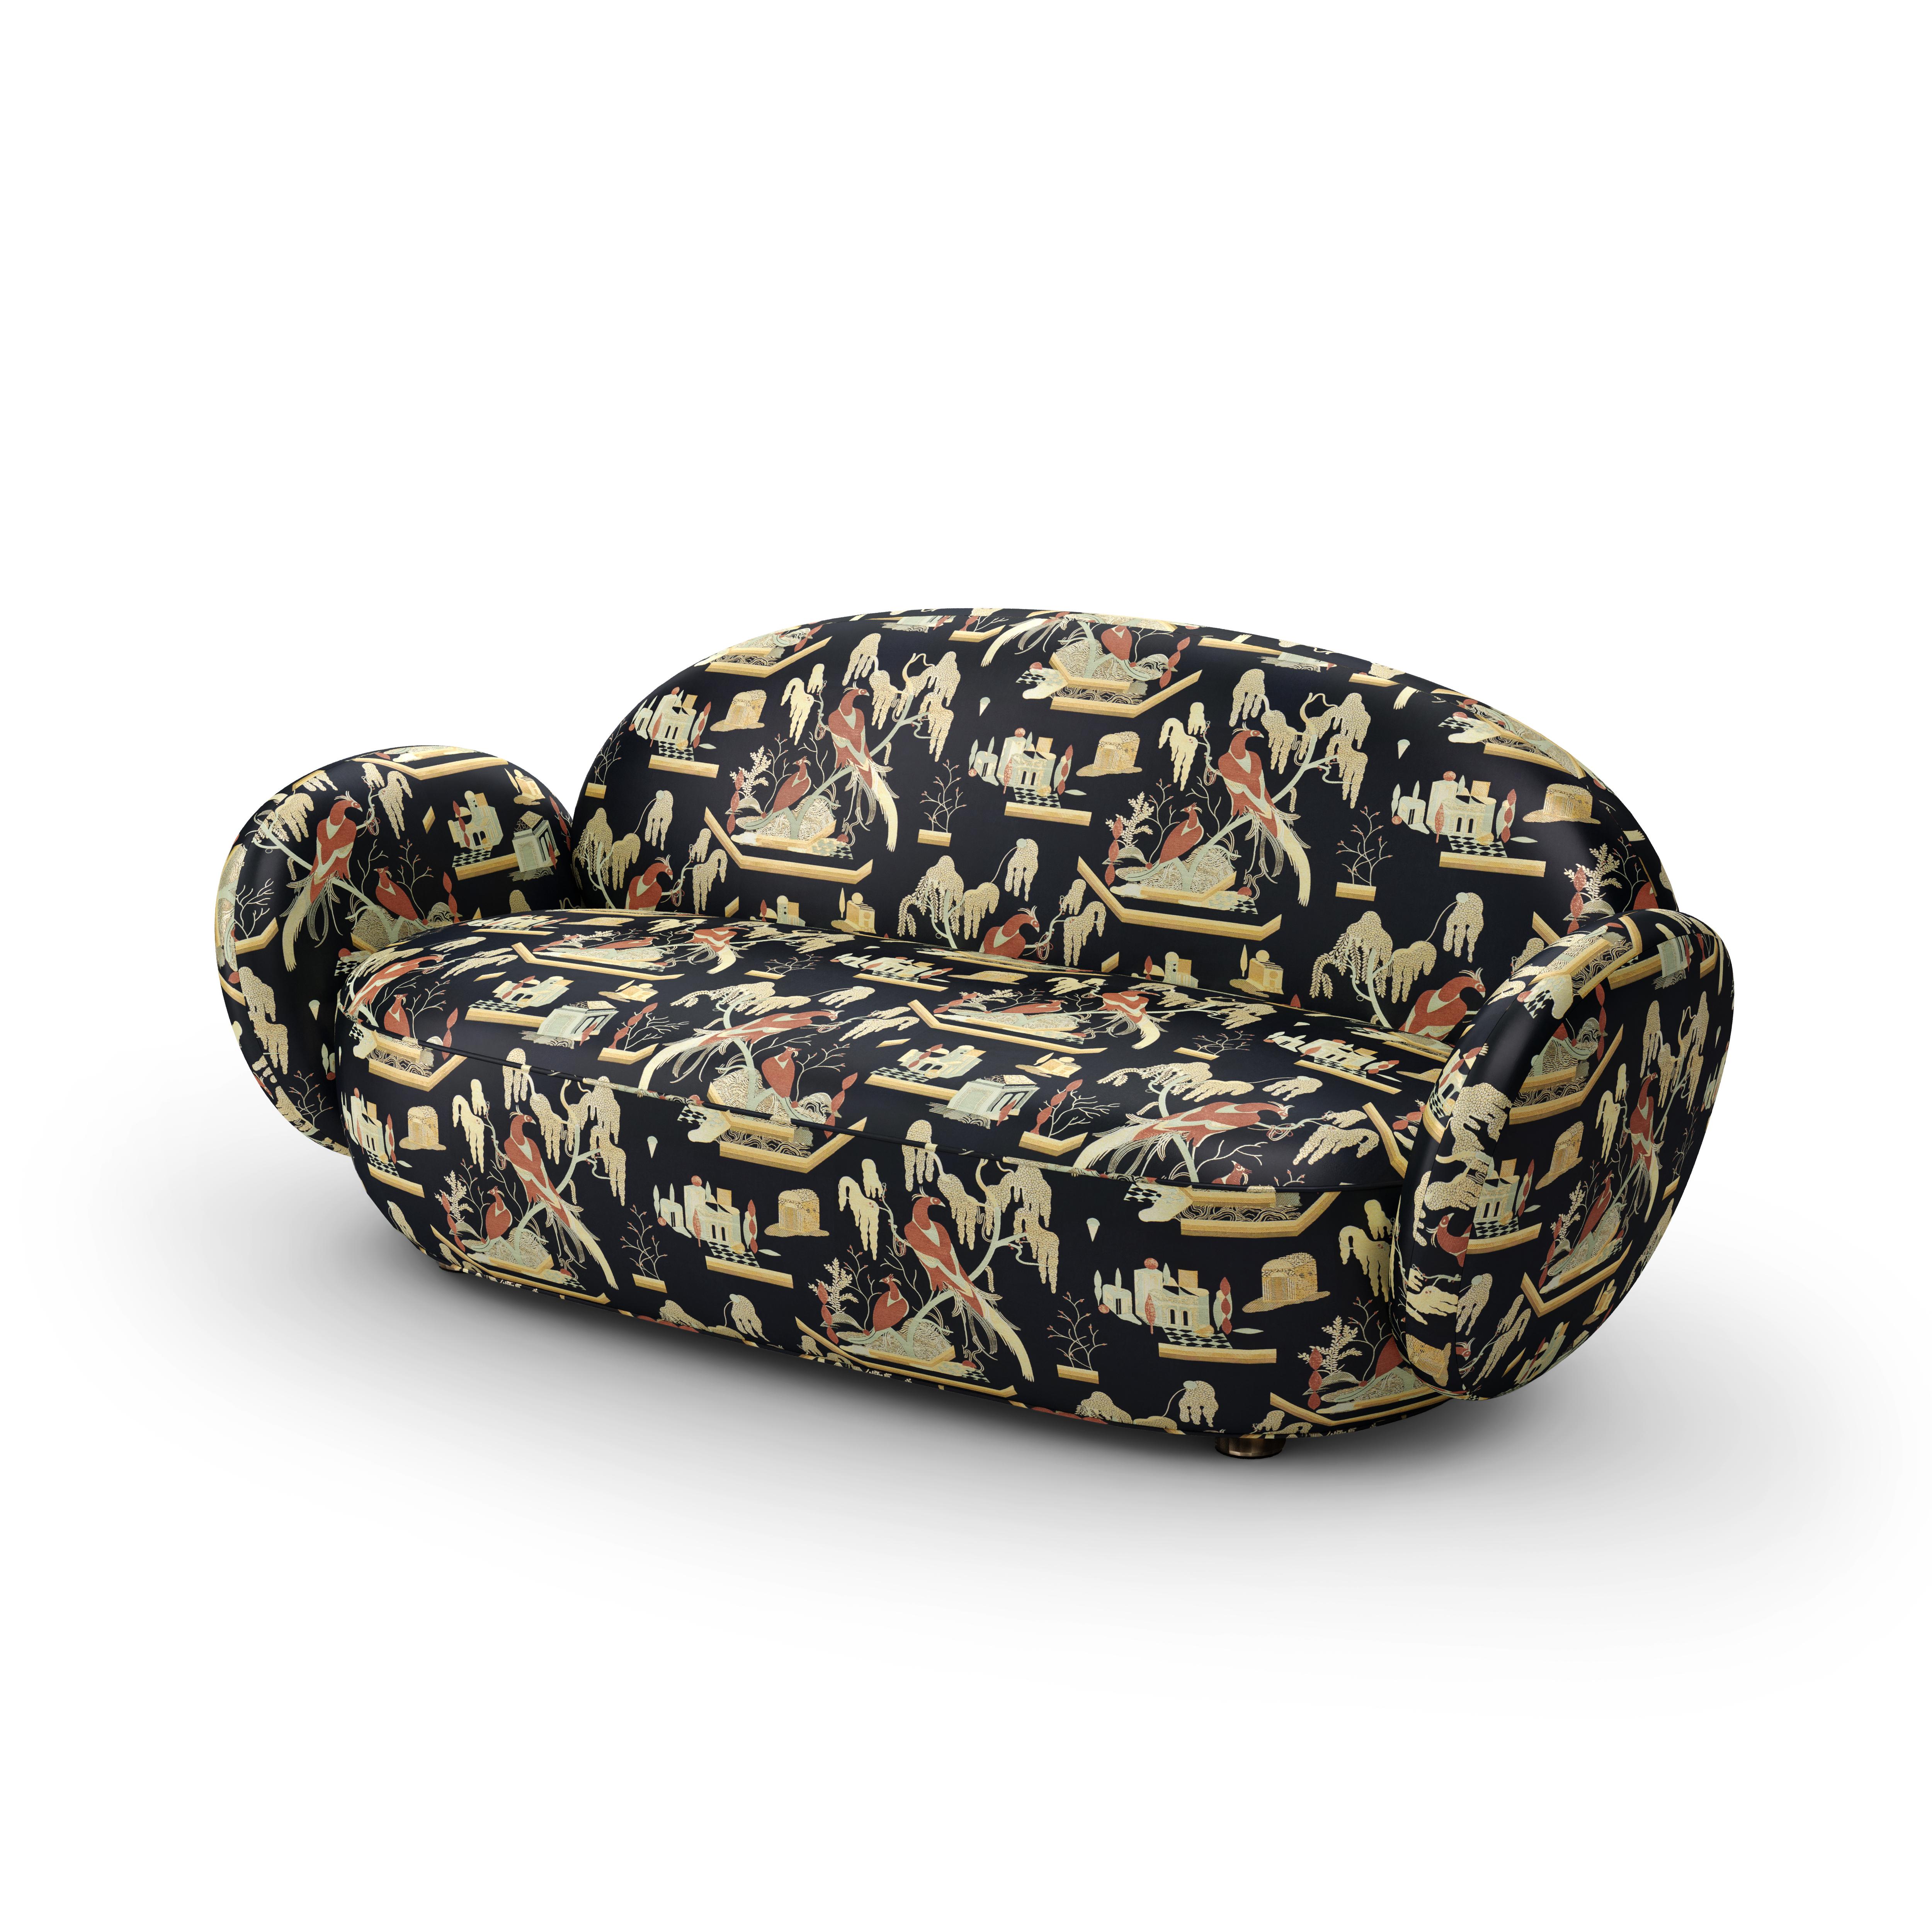 Dolce Sofa is an exquisite and ergonomically perfect three seater sofa upholstered in the plush black-beige jacquard fabric, This Must Be The Place by Dedar Milano. Ideal for playful lazing! Designed by Matteo Cibic

Have you heard of